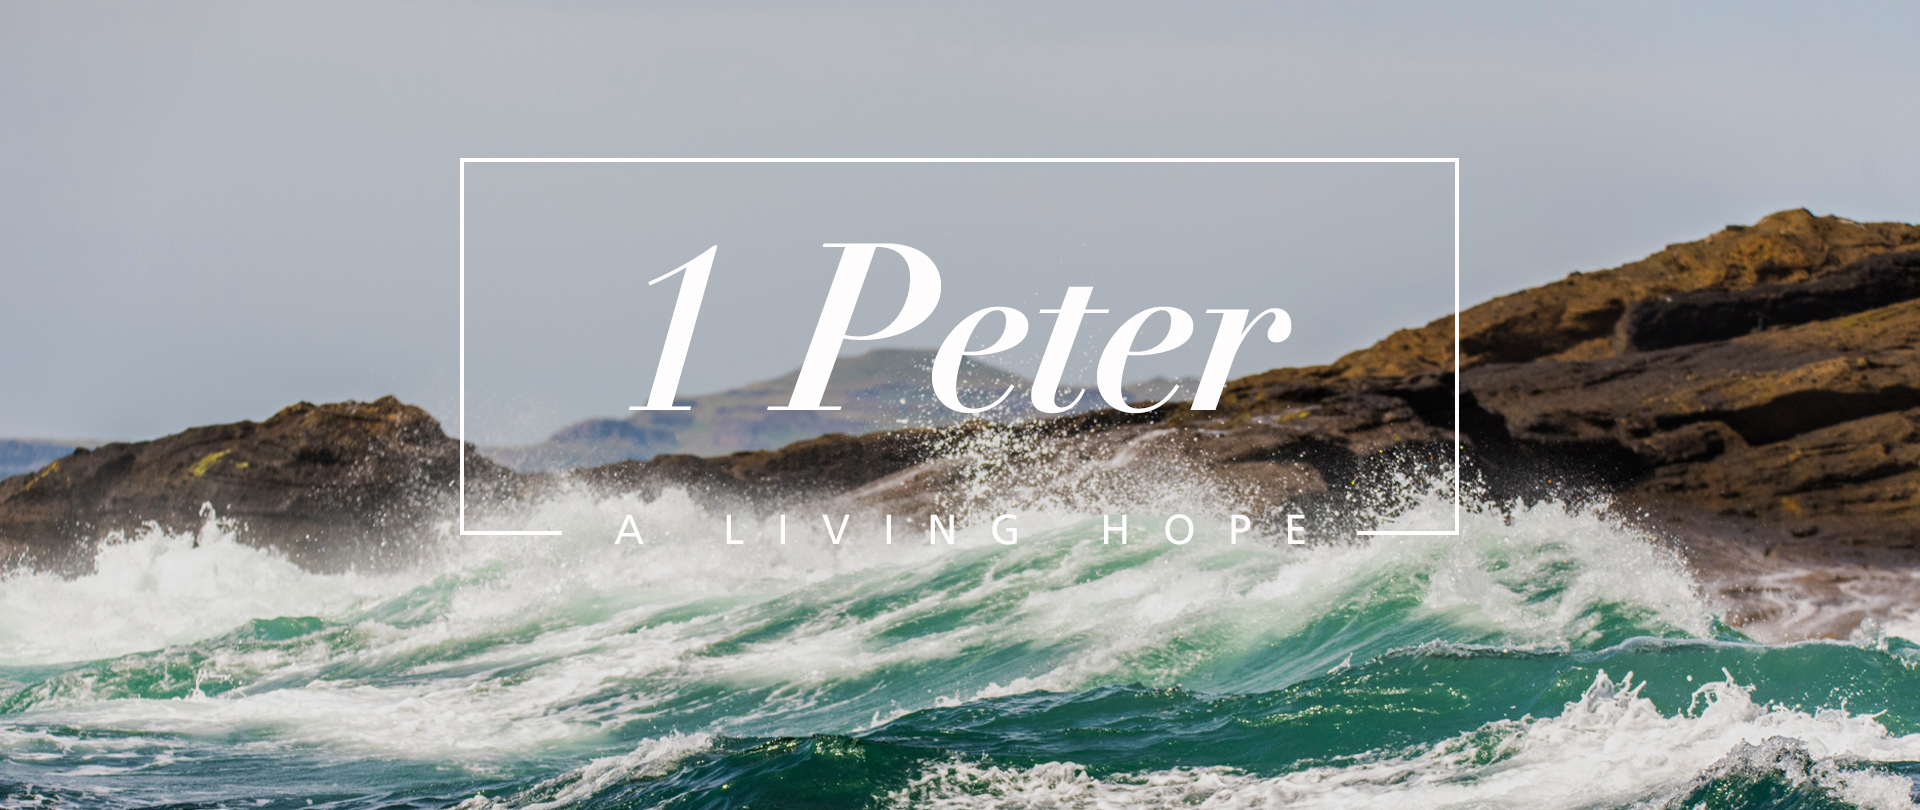 1 Peter
Sundays at 9:45 AM
Our Current Series
